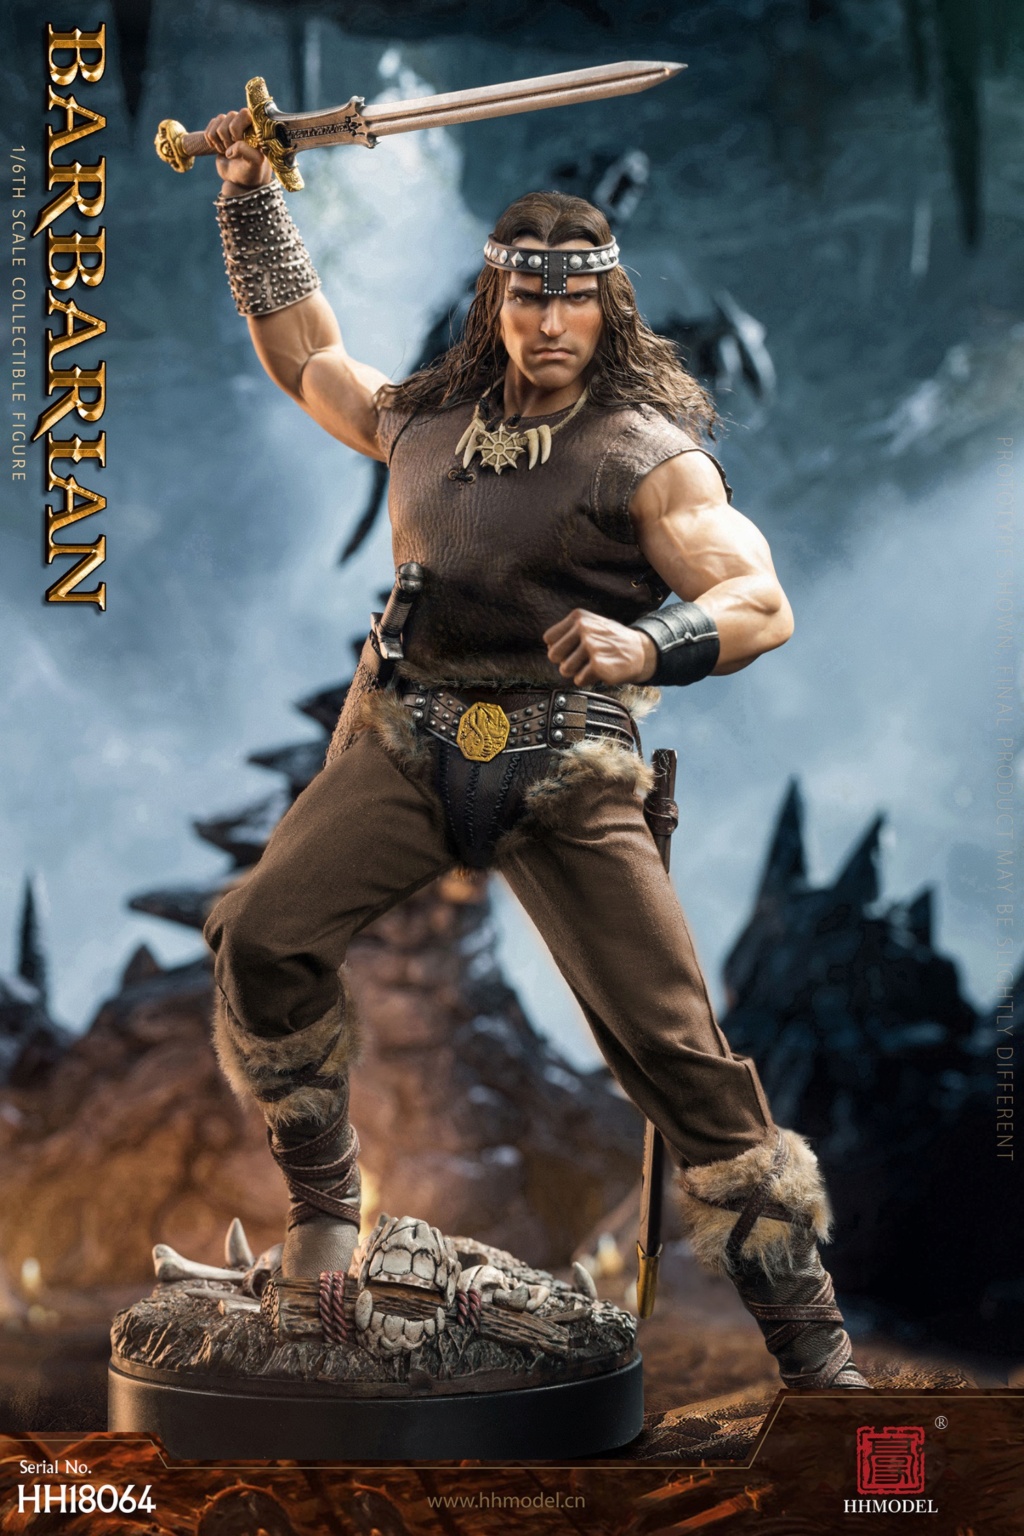 Fantasy - NEW PRODUCT: Haoyutoys: HH18064 1/6 Scale The Barbarian 18002110